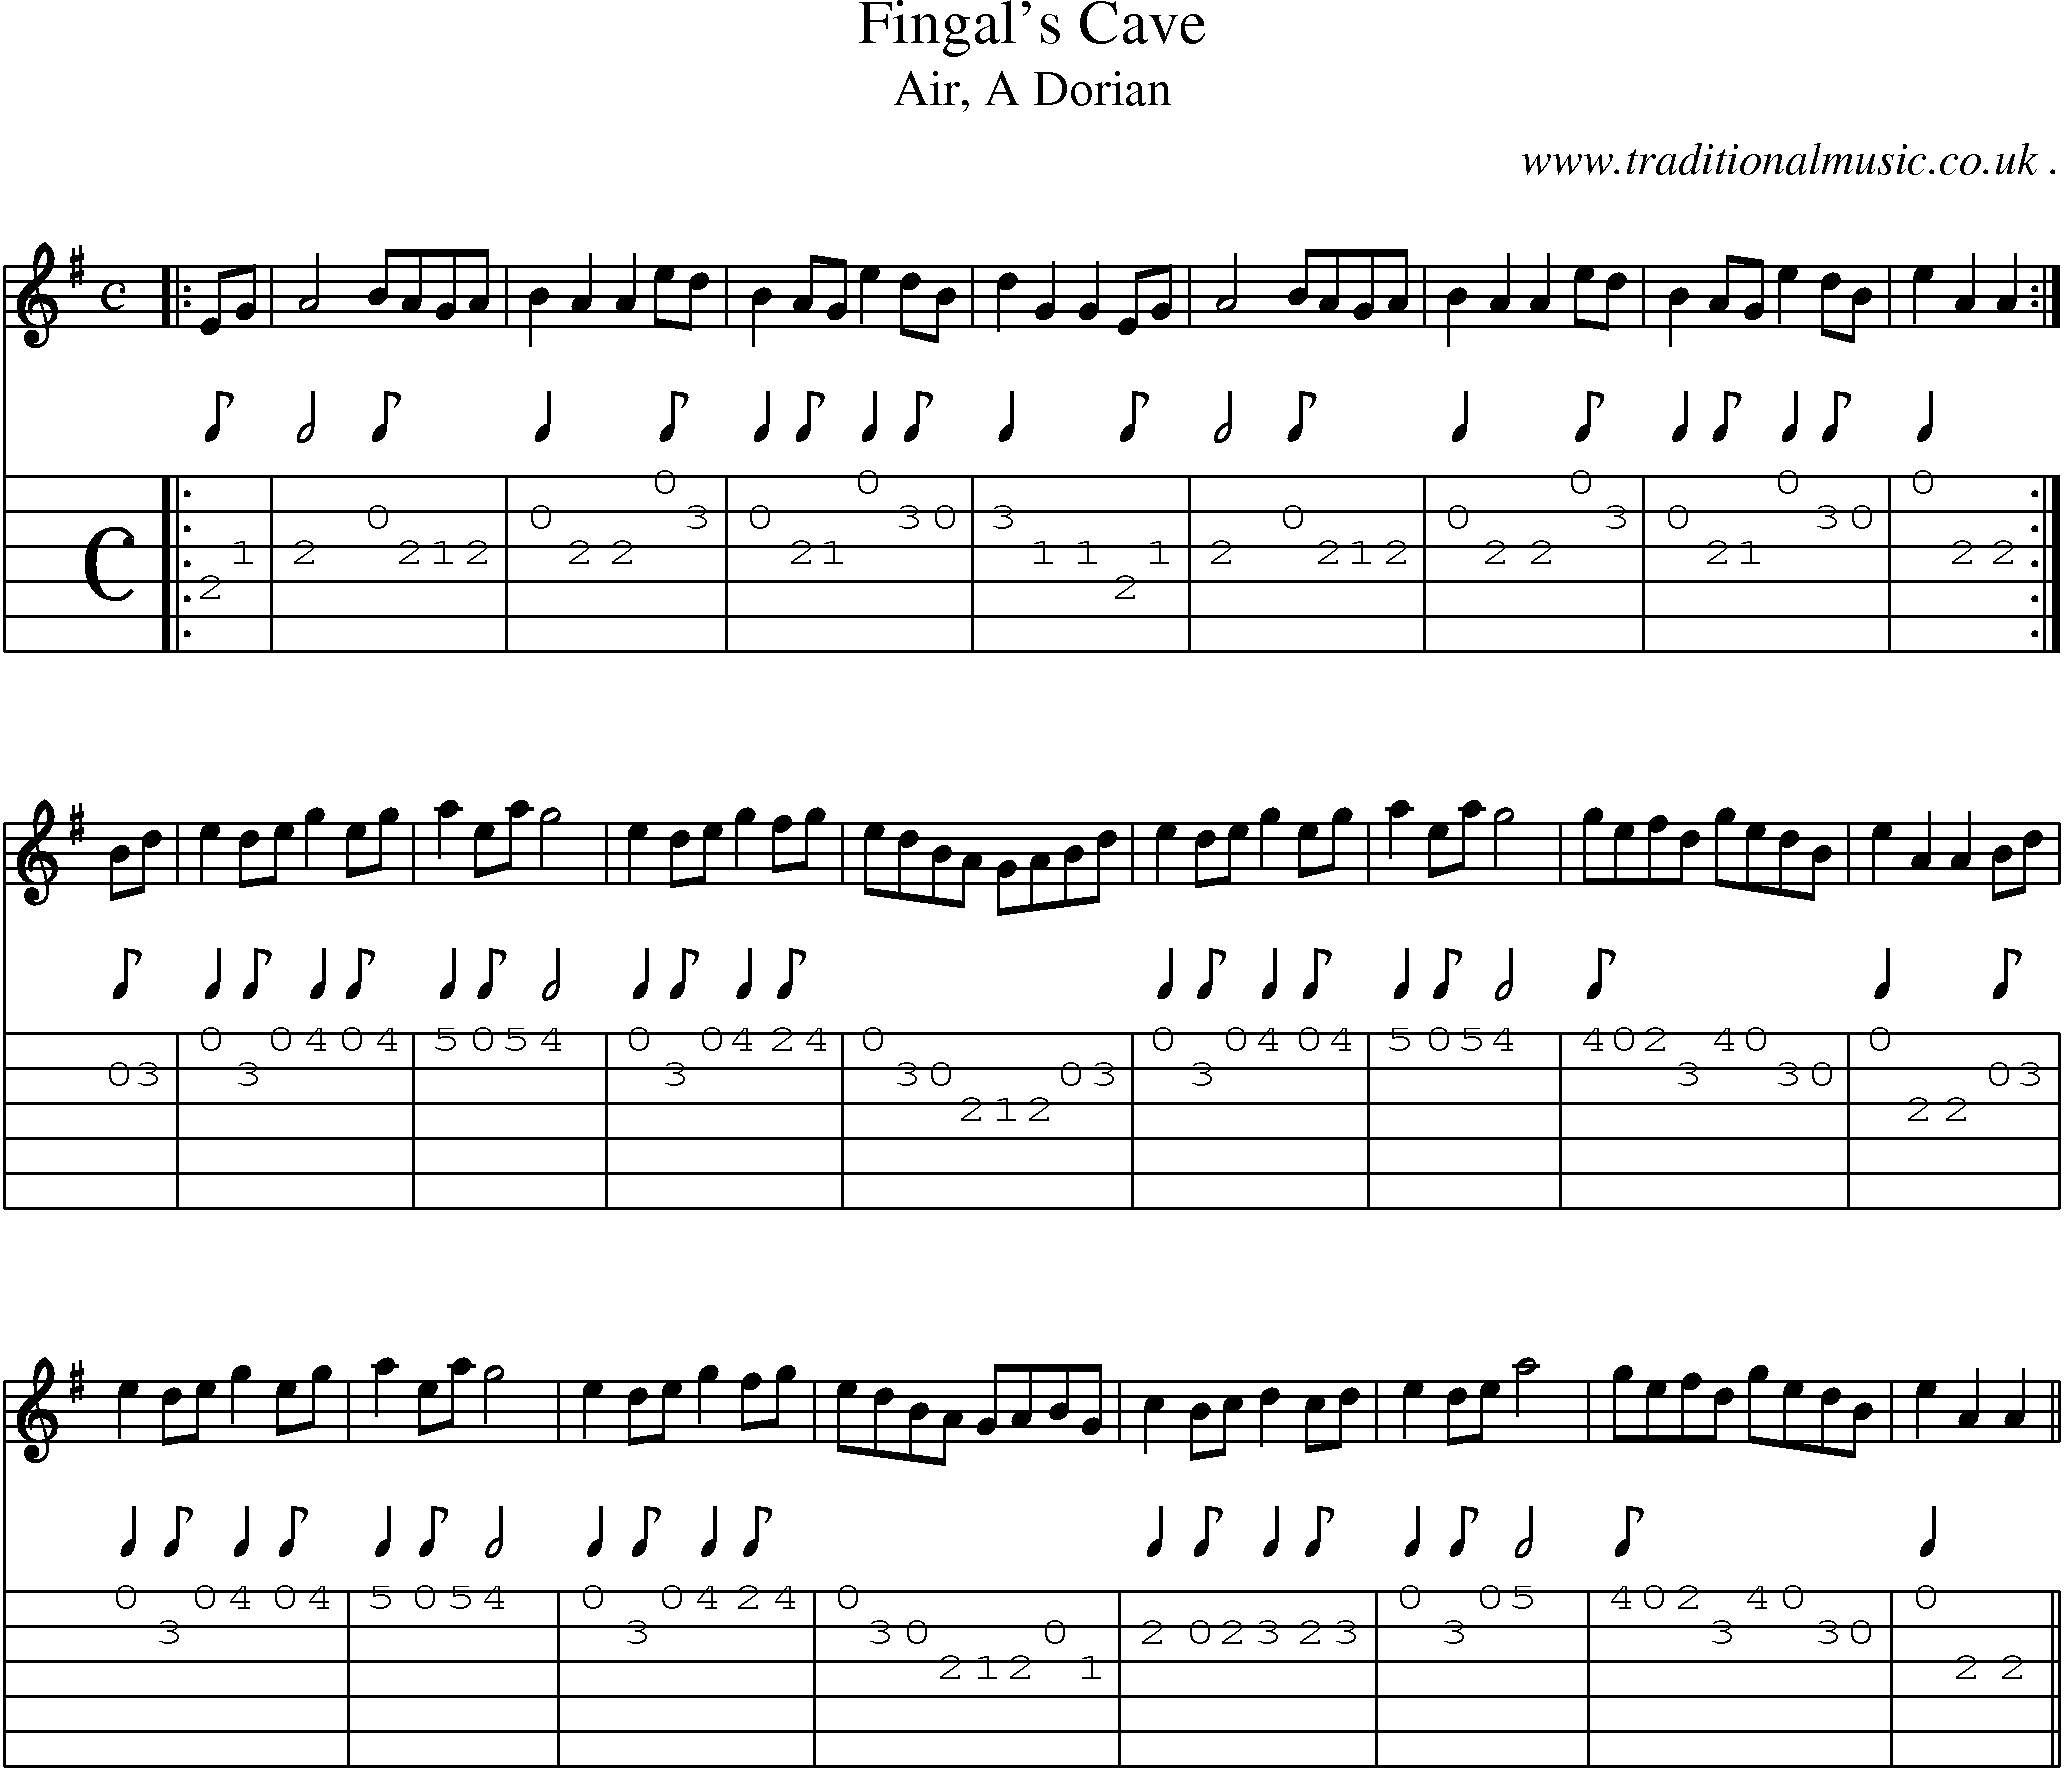 Sheet-music  score, Chords and Guitar Tabs for Fingals Cave